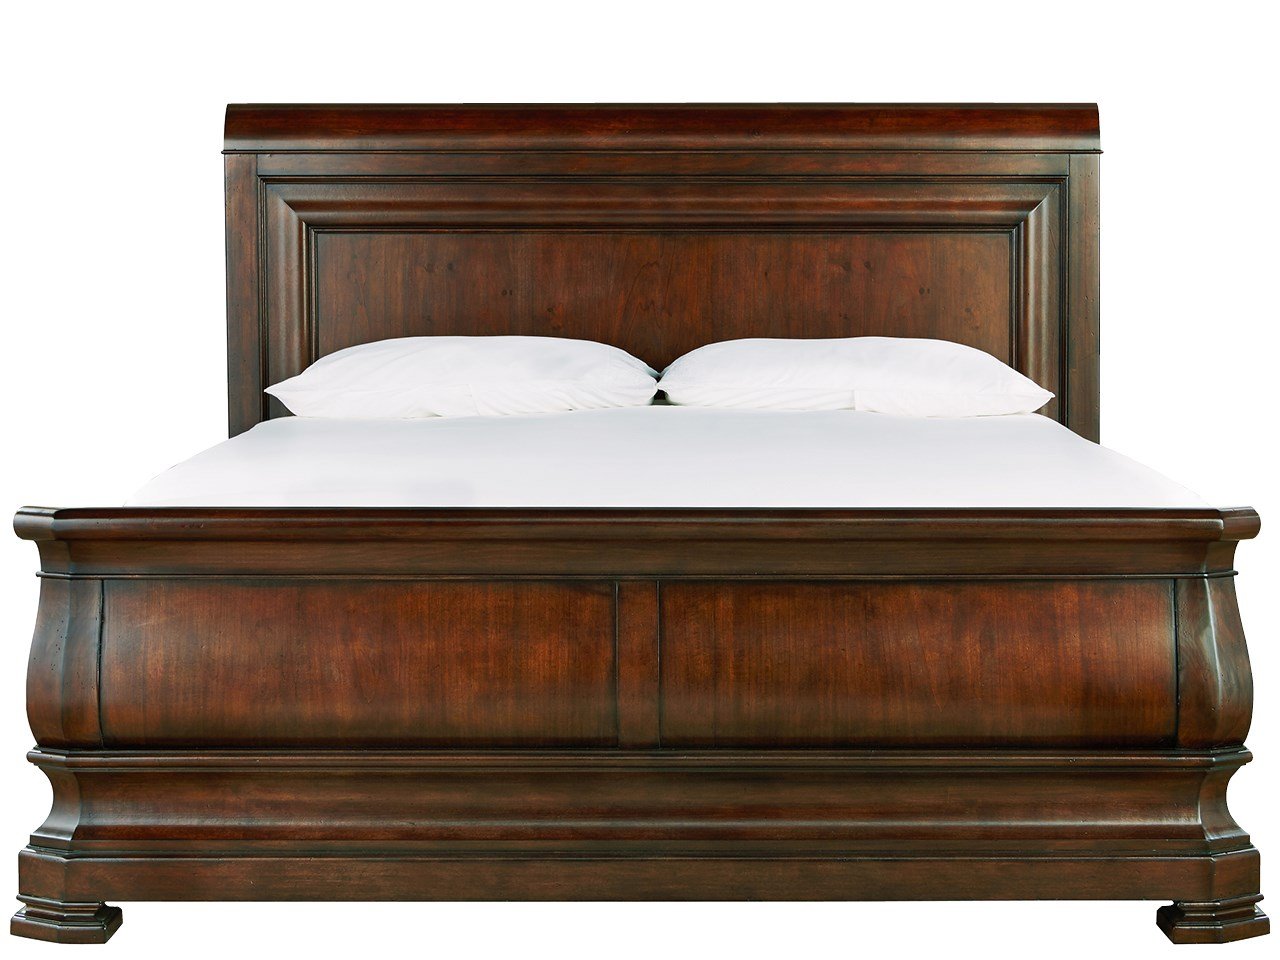 Reprise King Sleigh Bed Universal, Wooden Sleigh Bed King